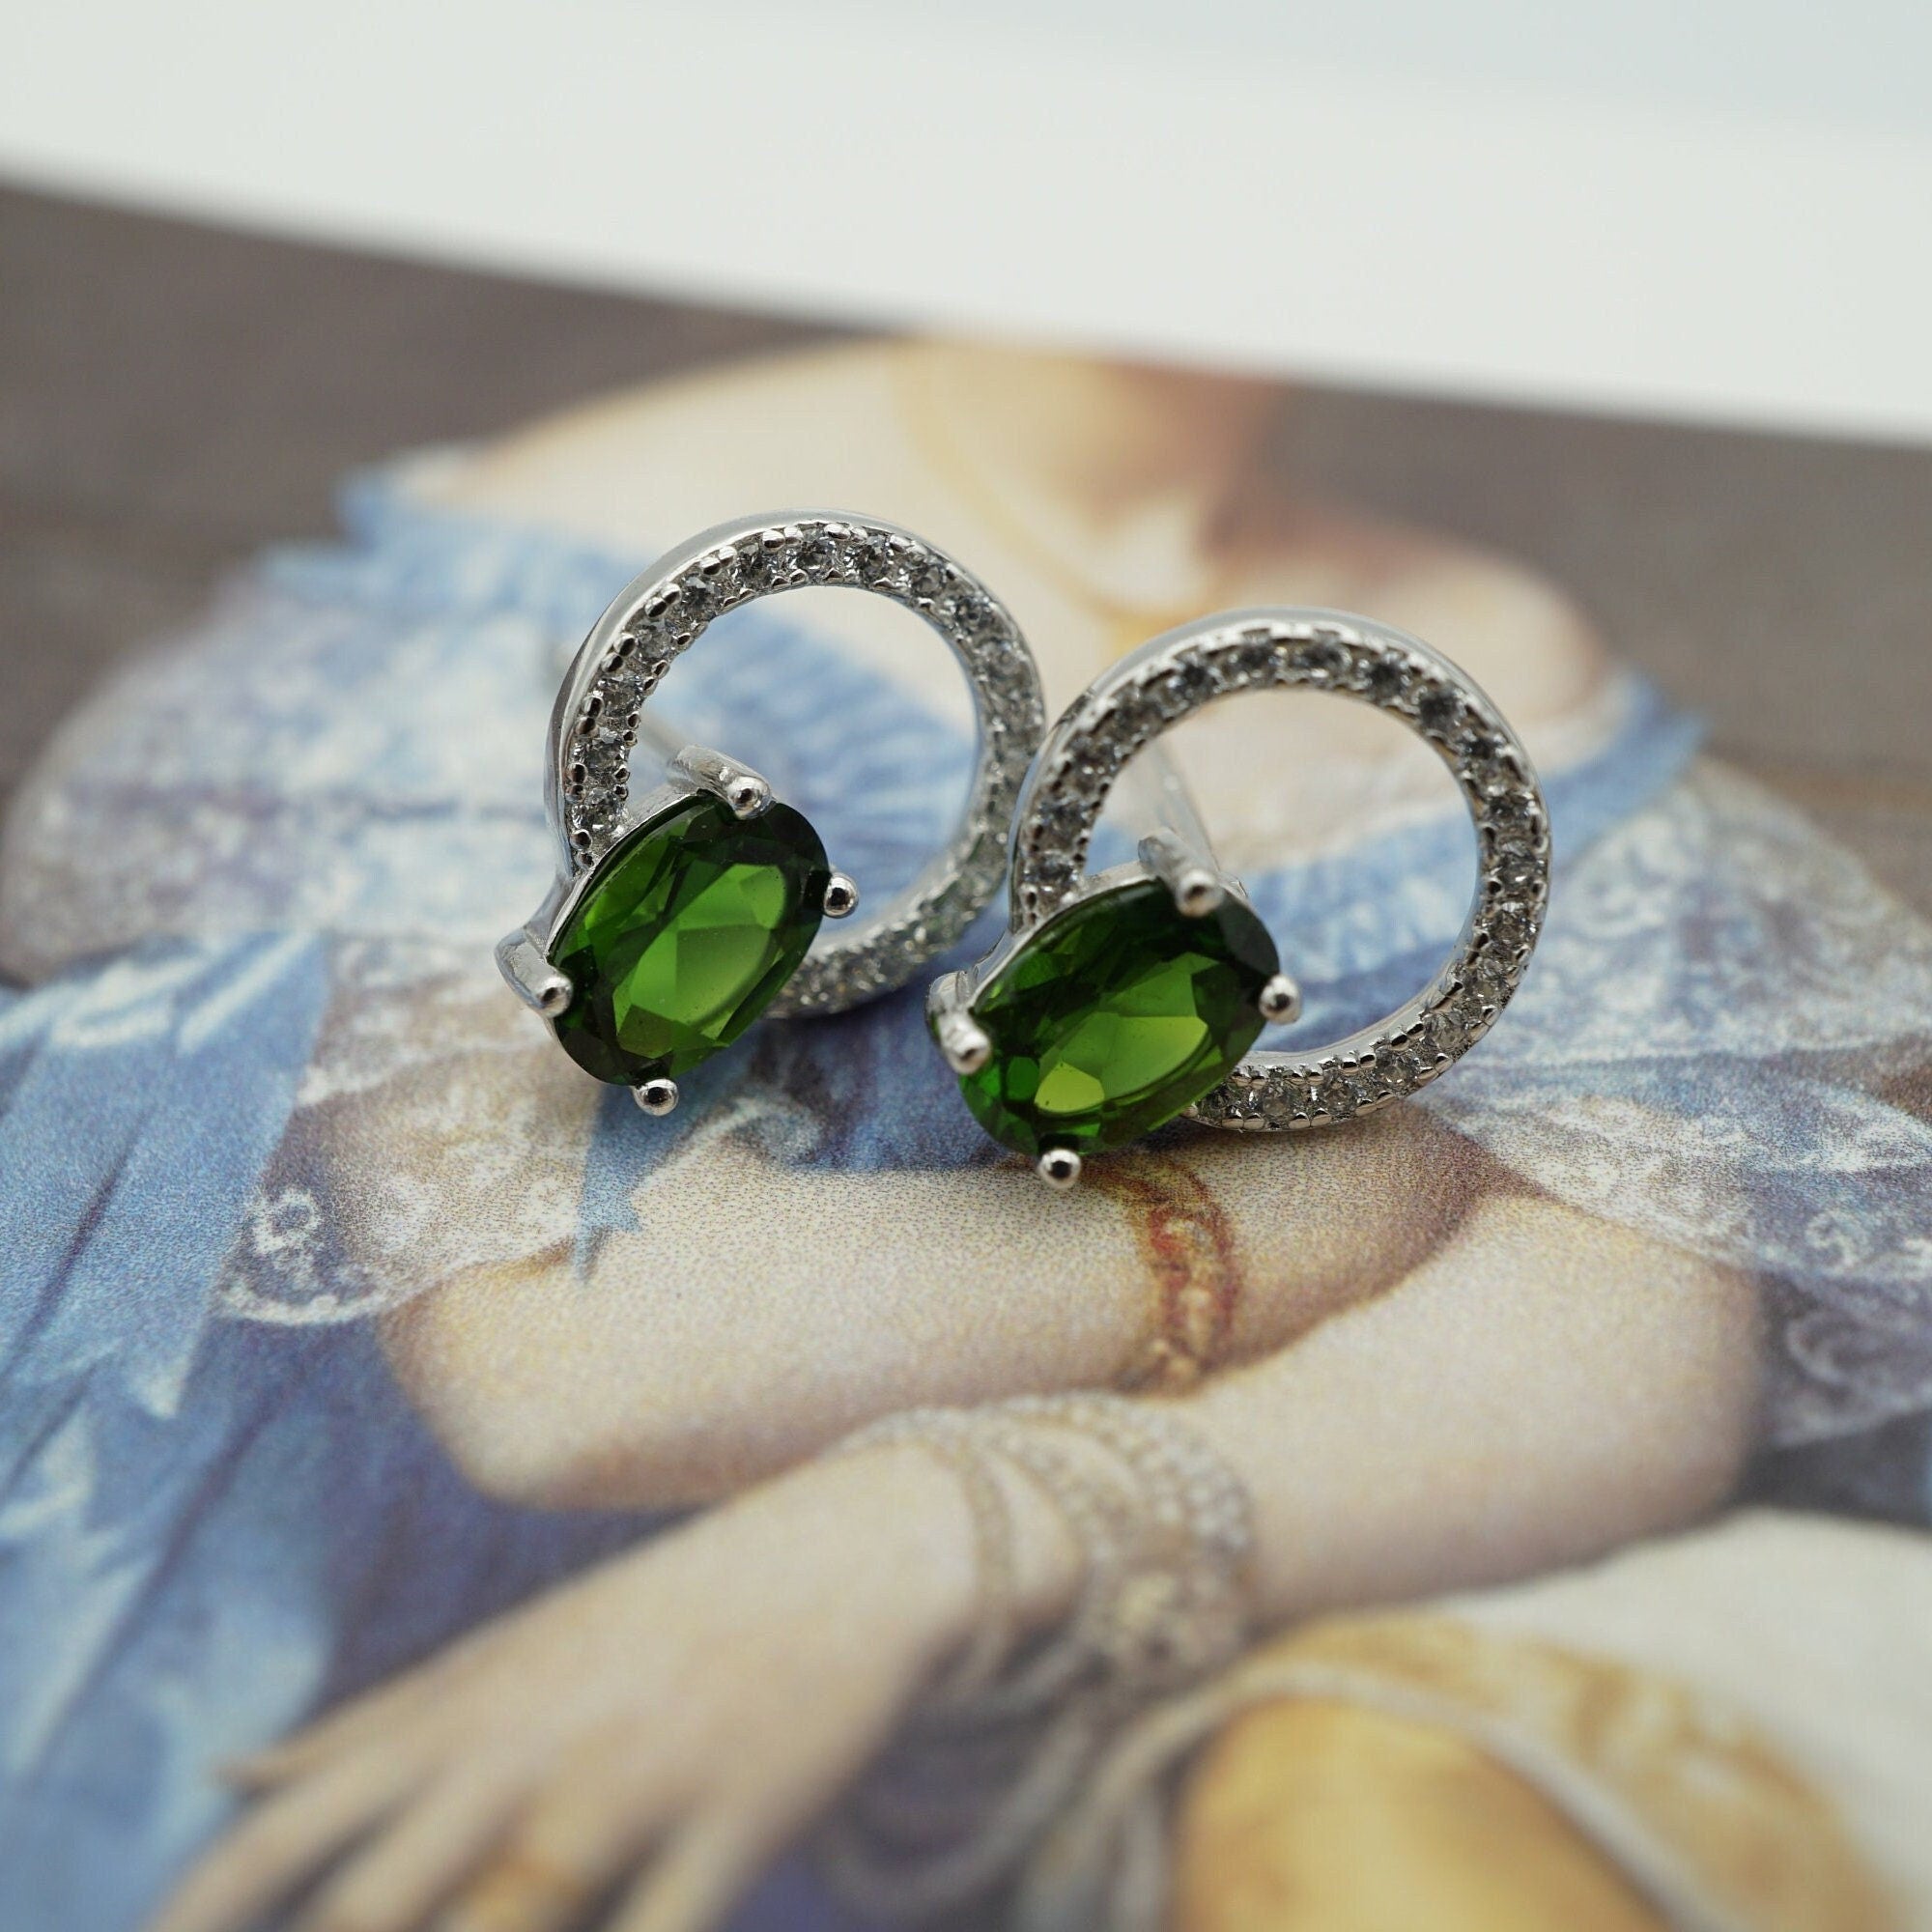 Chrome Diopside Earrings with Cubic Zirconias